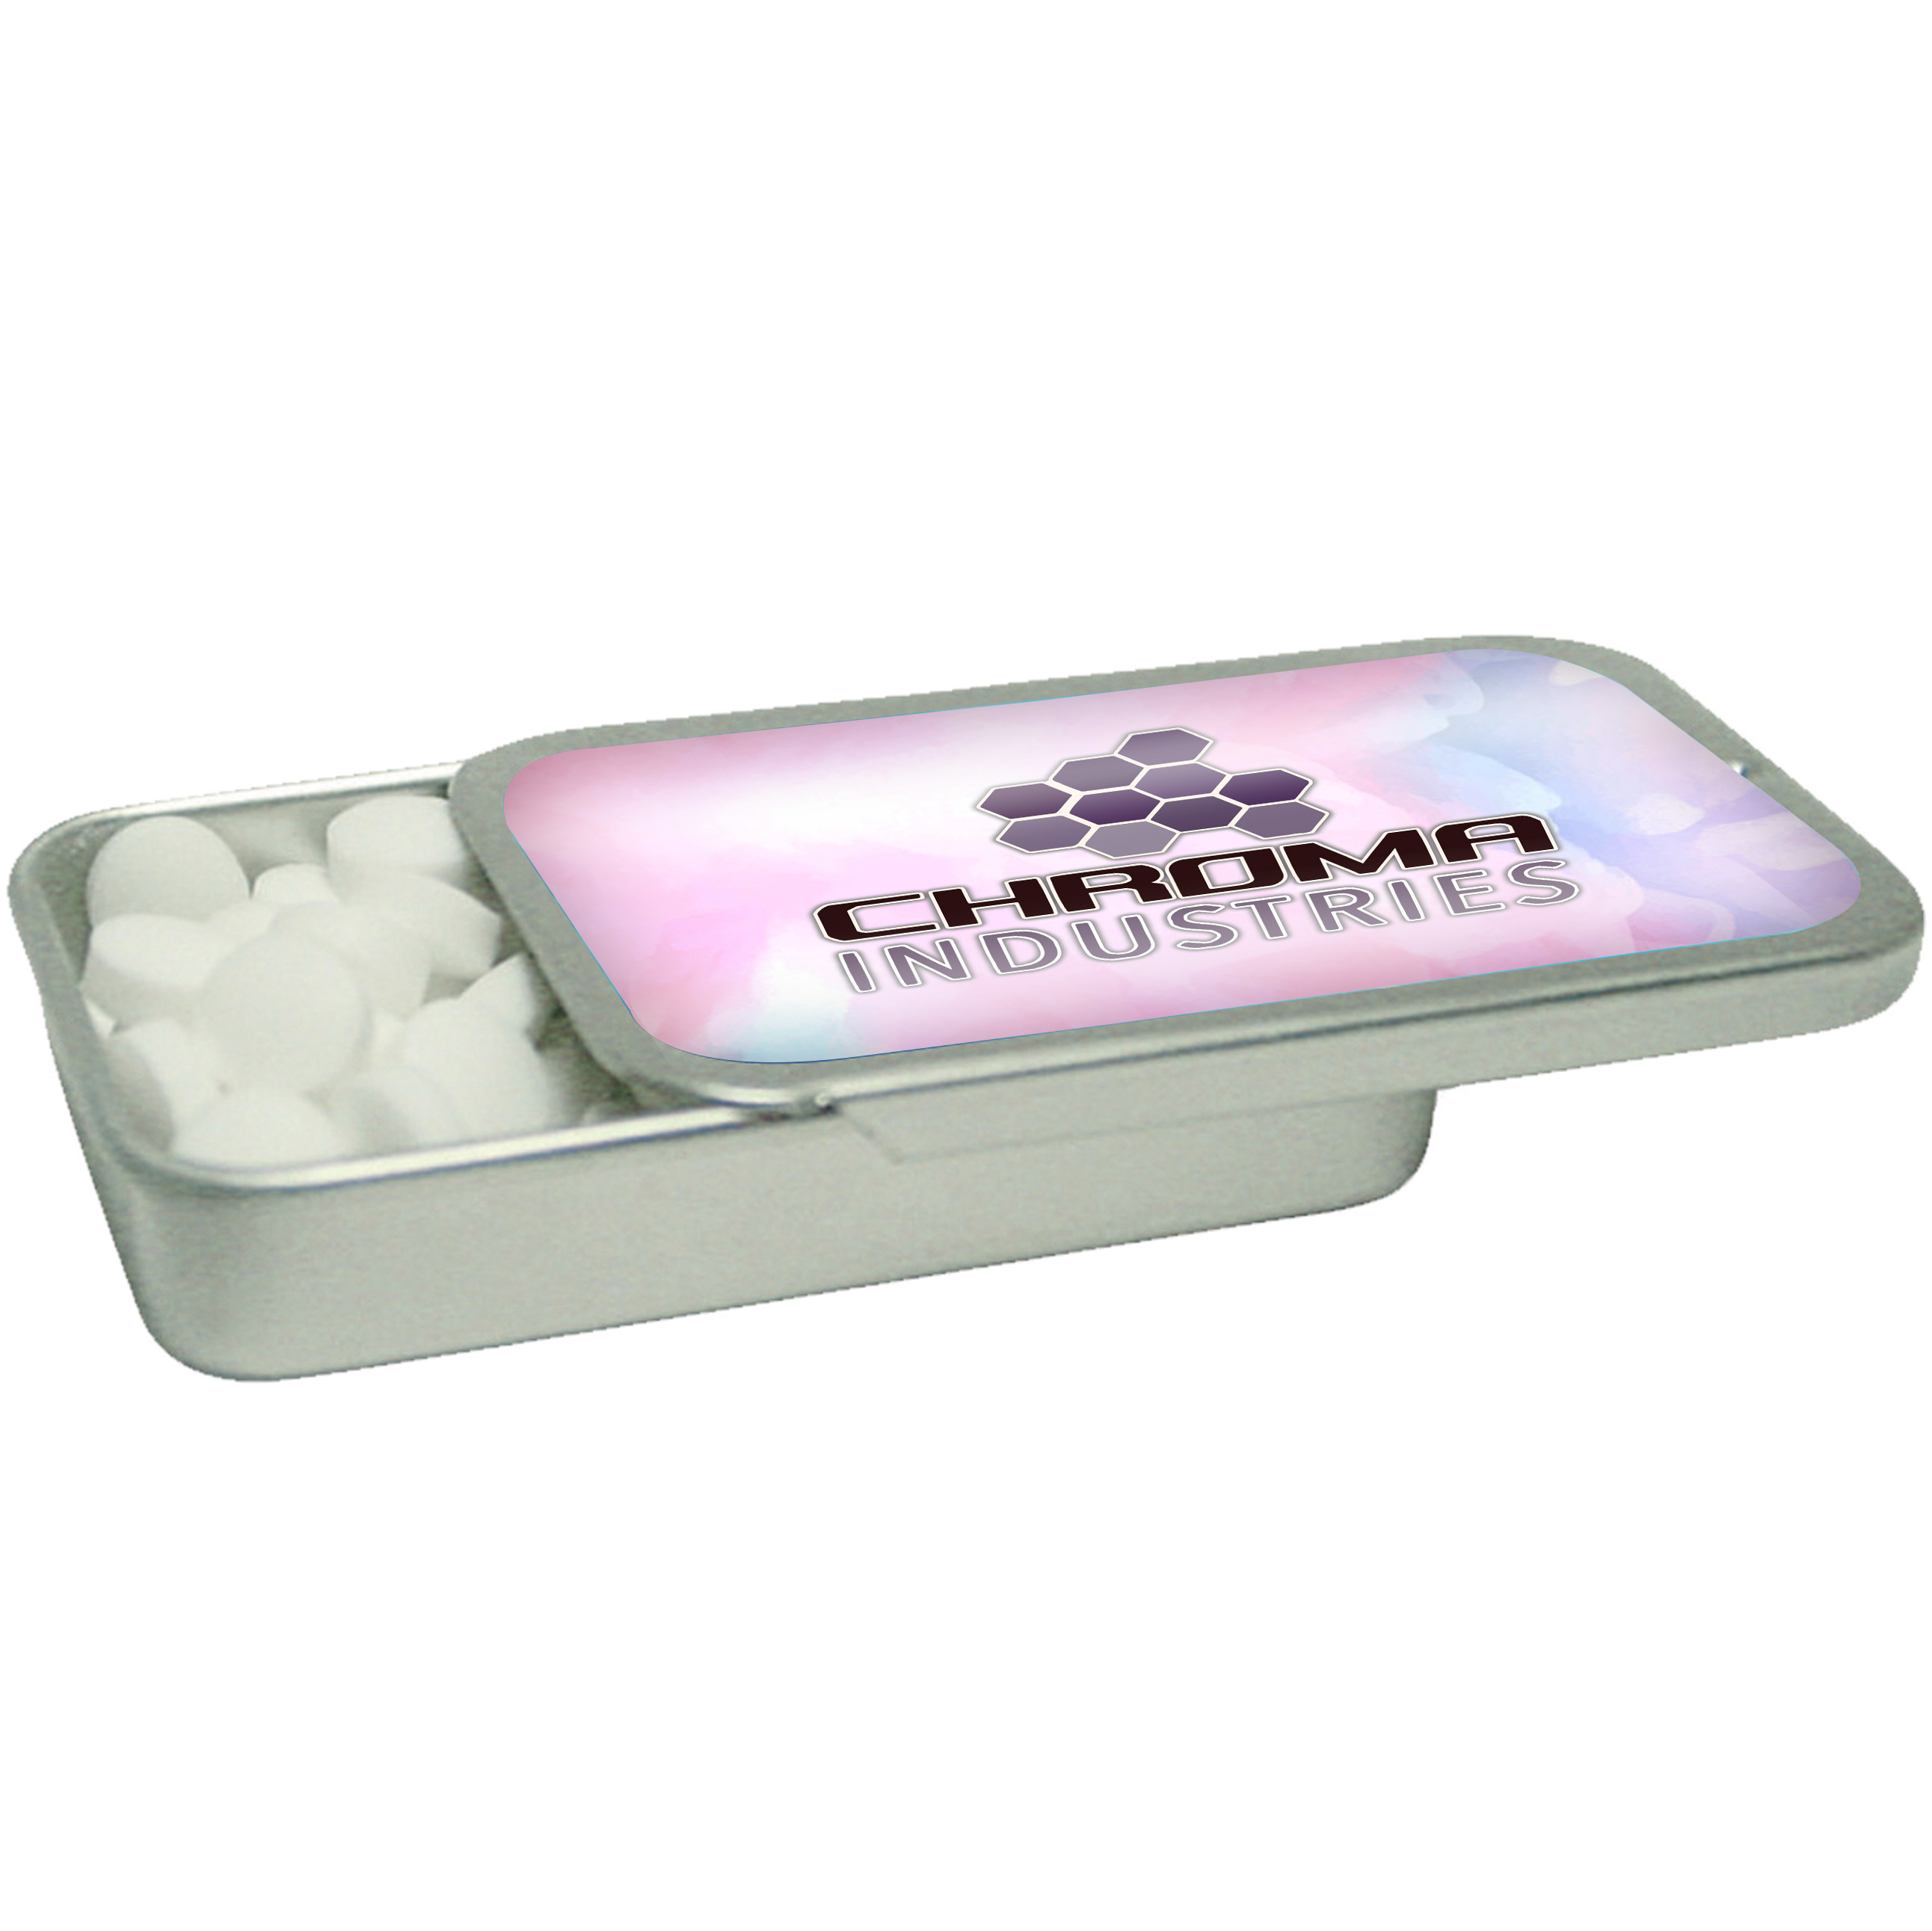 Promotional Logo Car Shaped Mint Tins with Candies